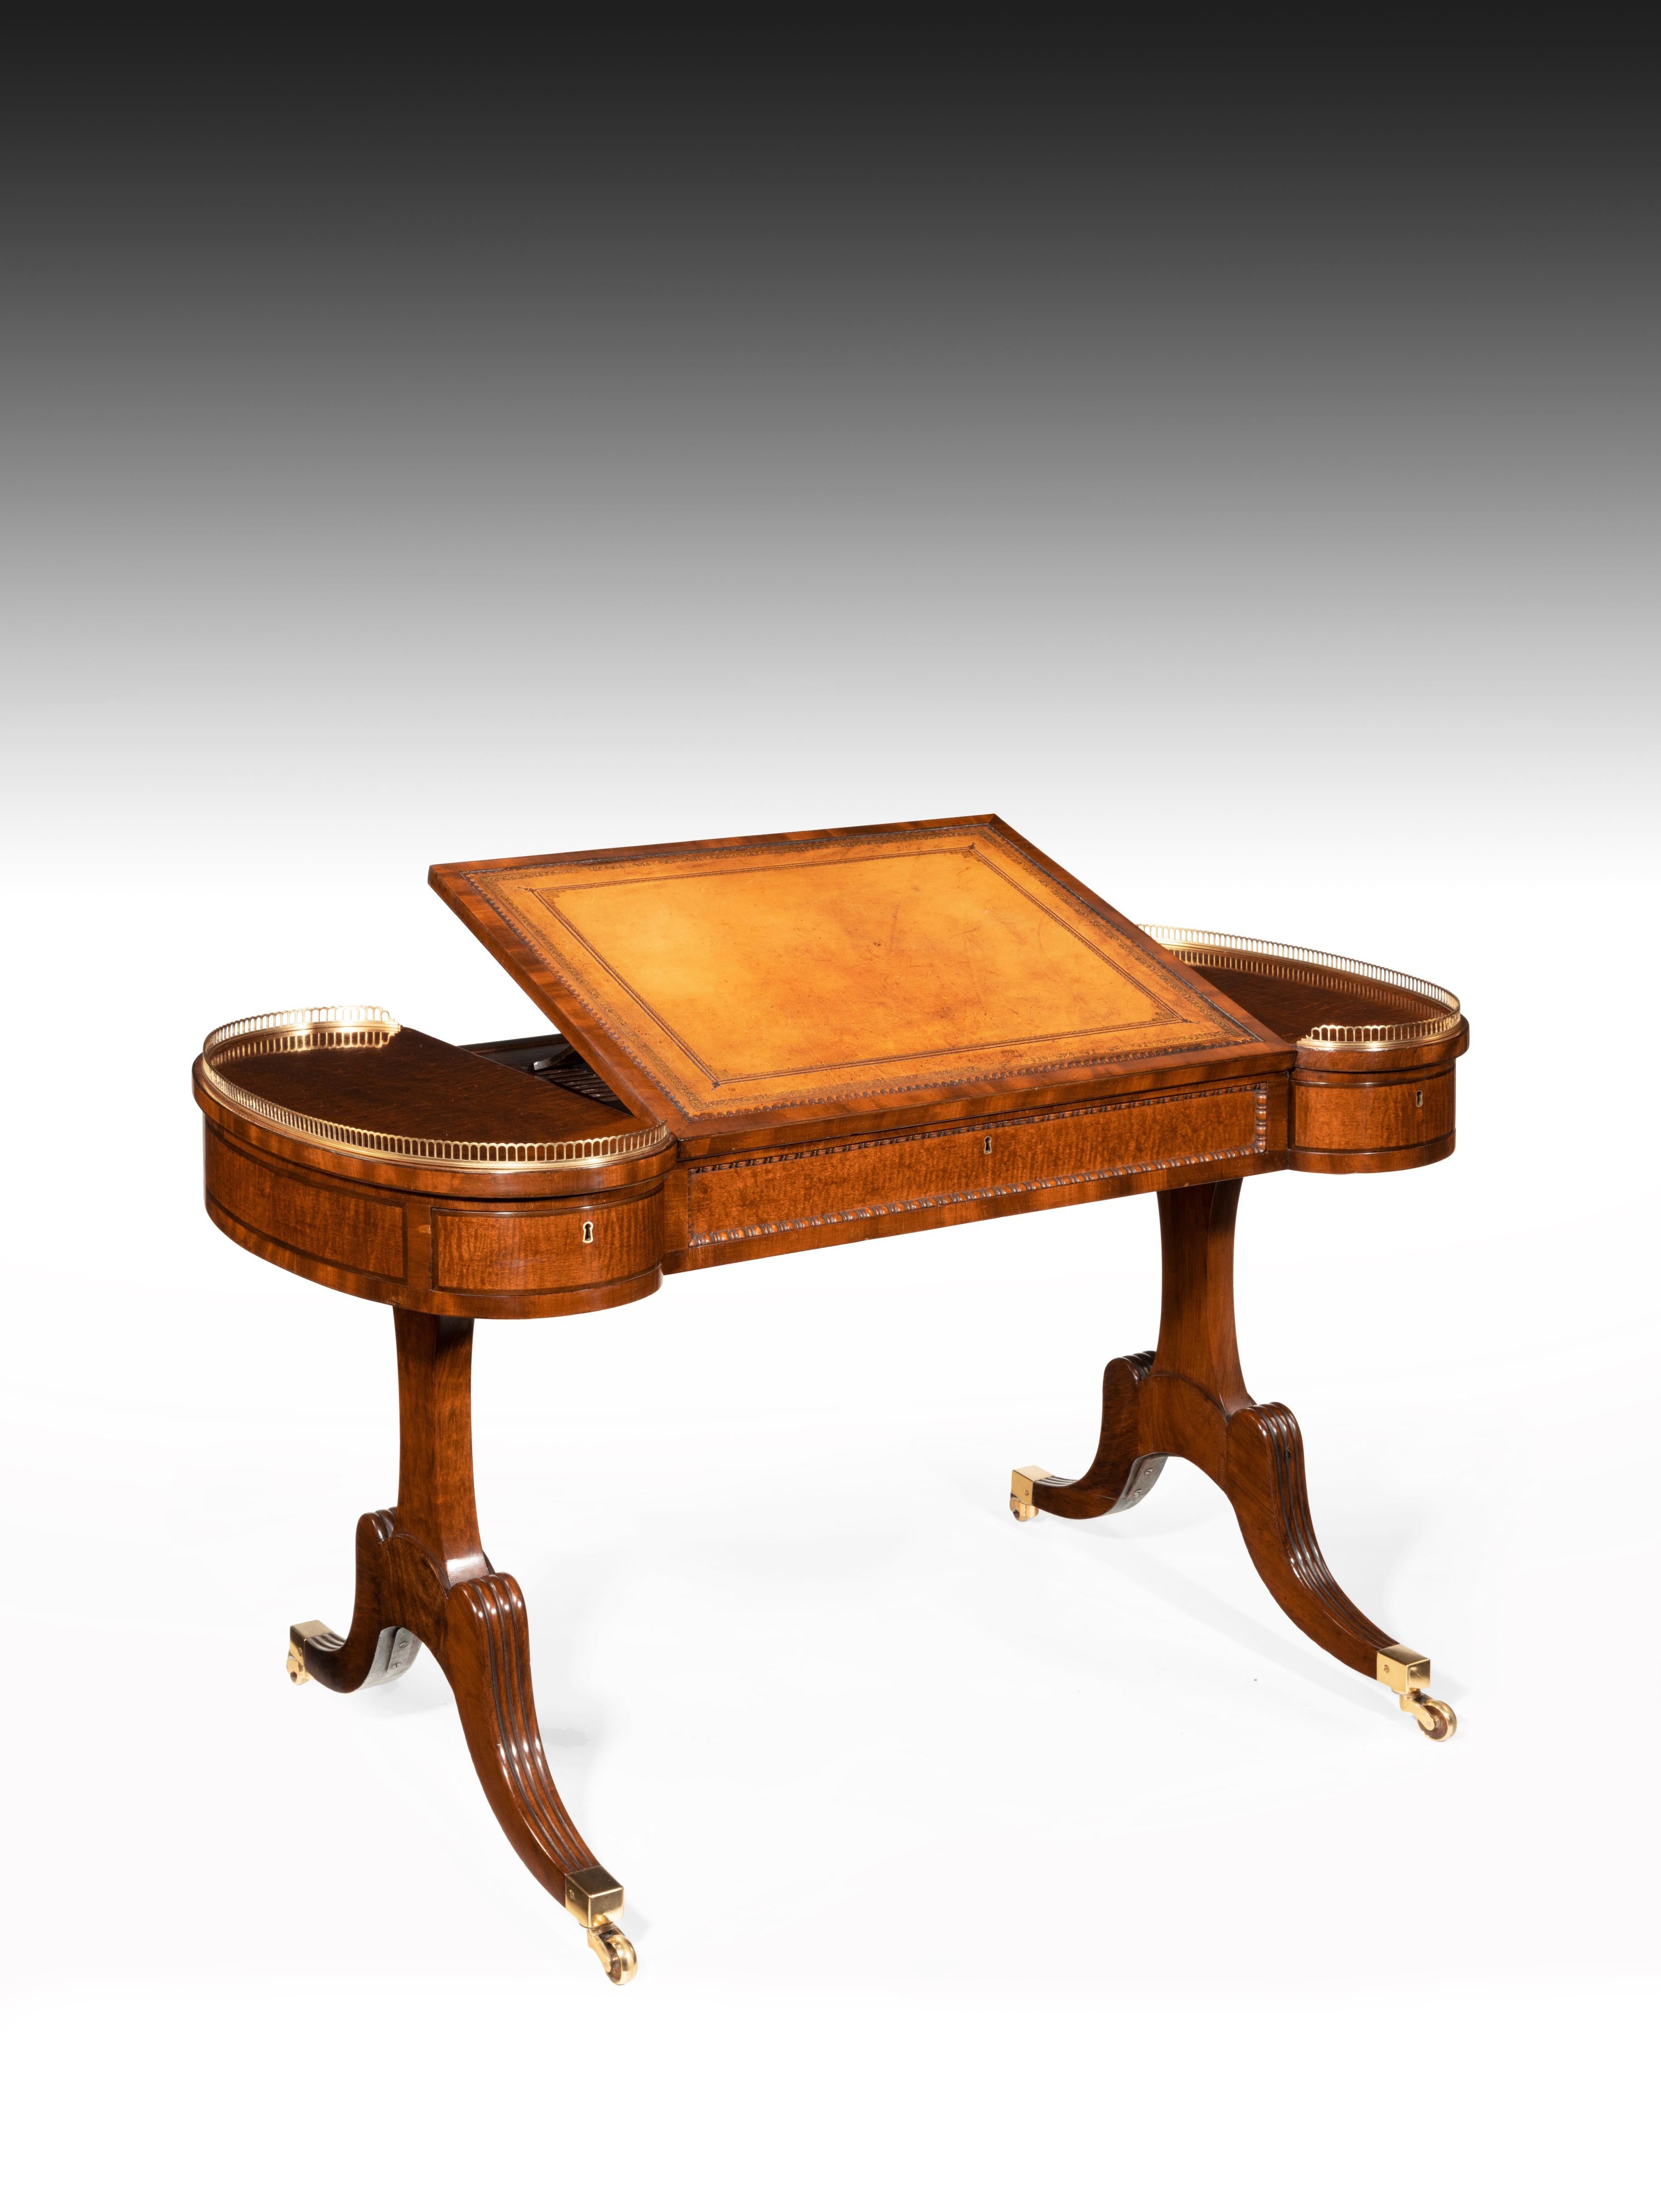 An extremely rare early 19th century Regency period fiddleback mahogany writing table with adjustable writing slope bearing all the signs of the famous cabinet makers Gillows.

Very unusual in form, being constructed of the finest cuts of